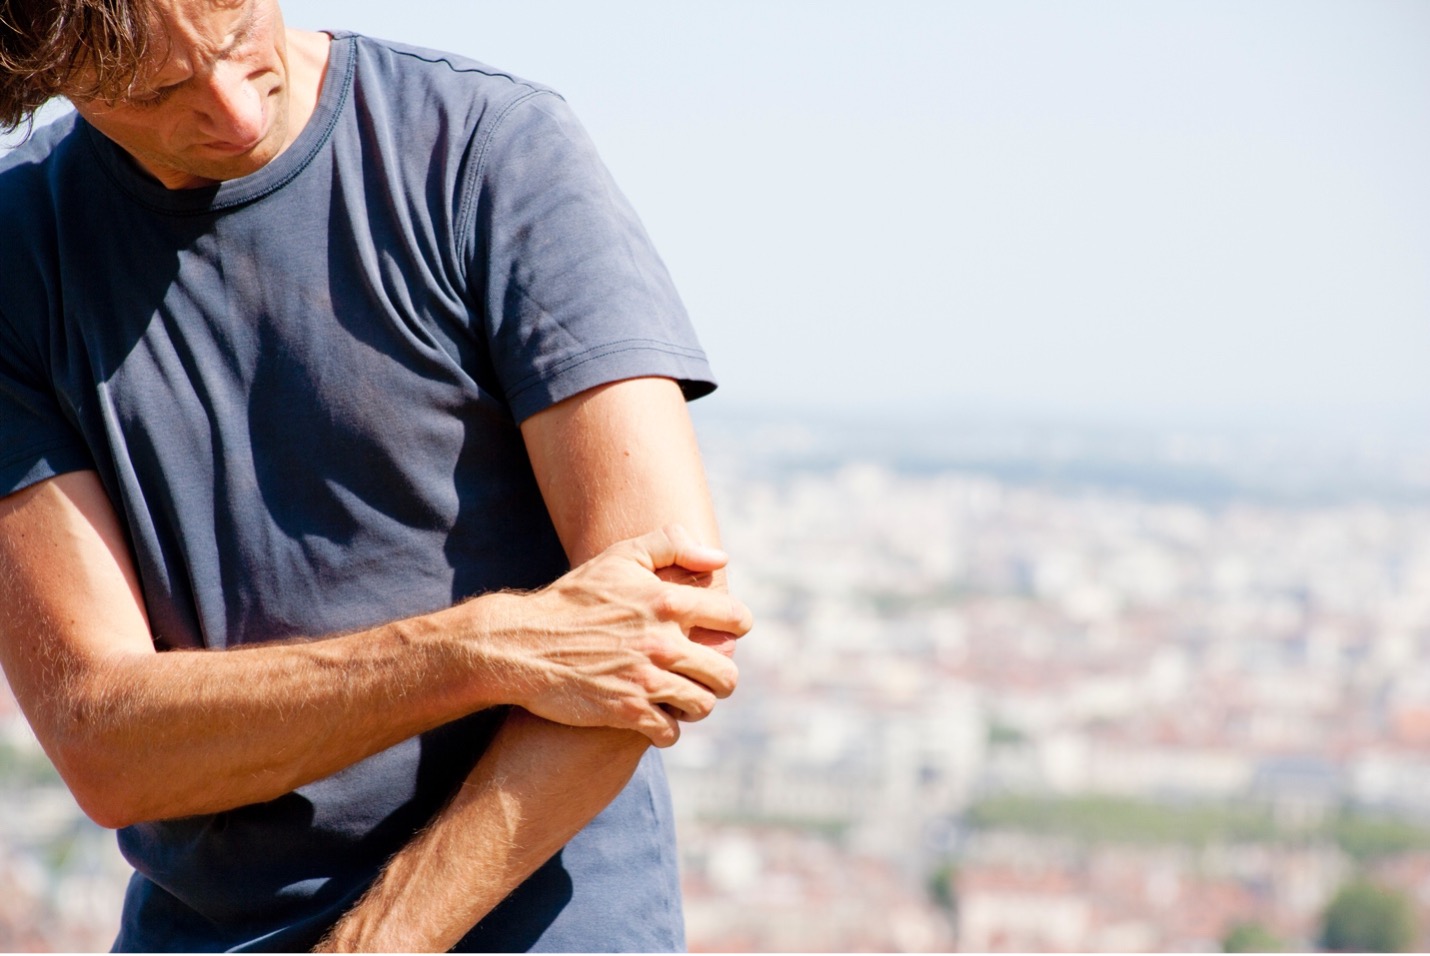 Natural Joint & Pain Management Treatments for Tennis and Golfer’s Elbow